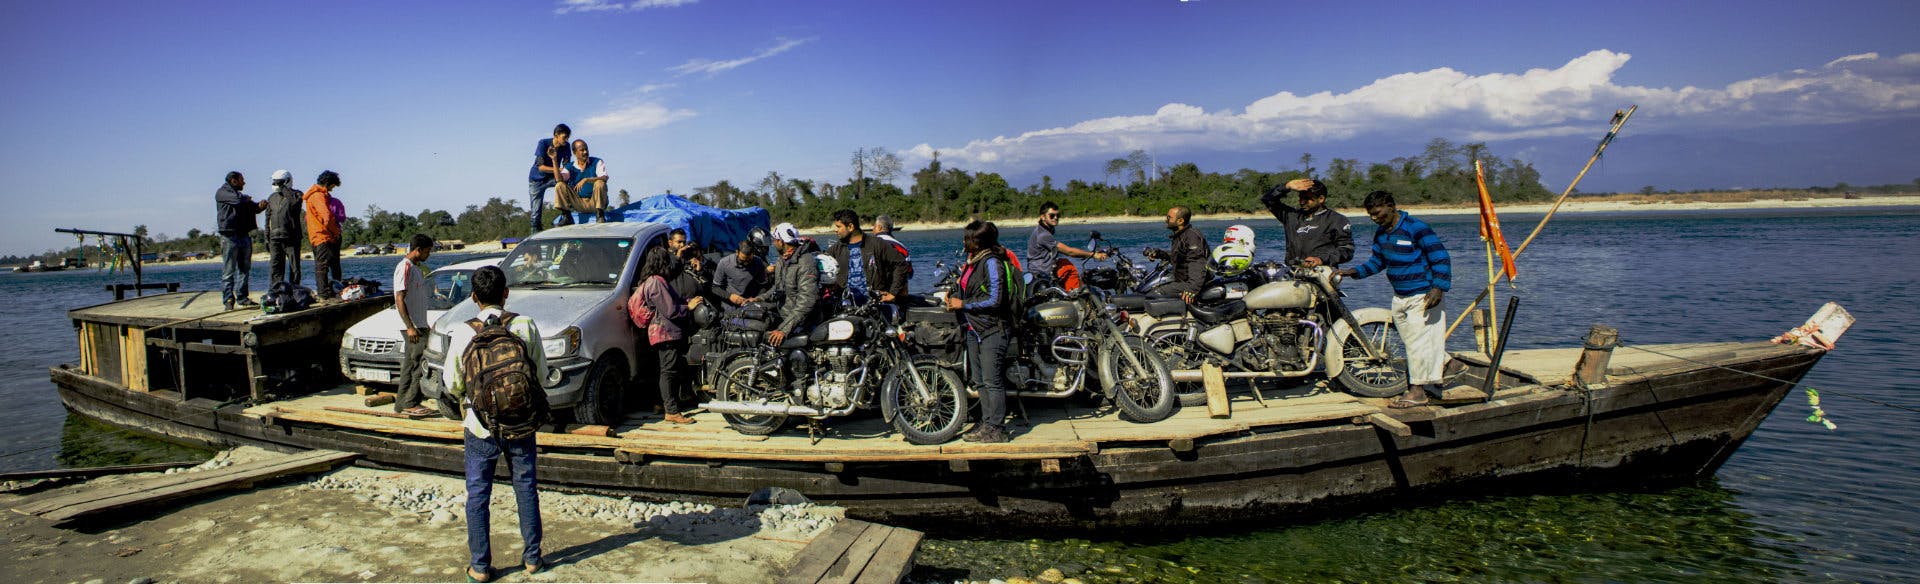 Northeast India ferry crossing